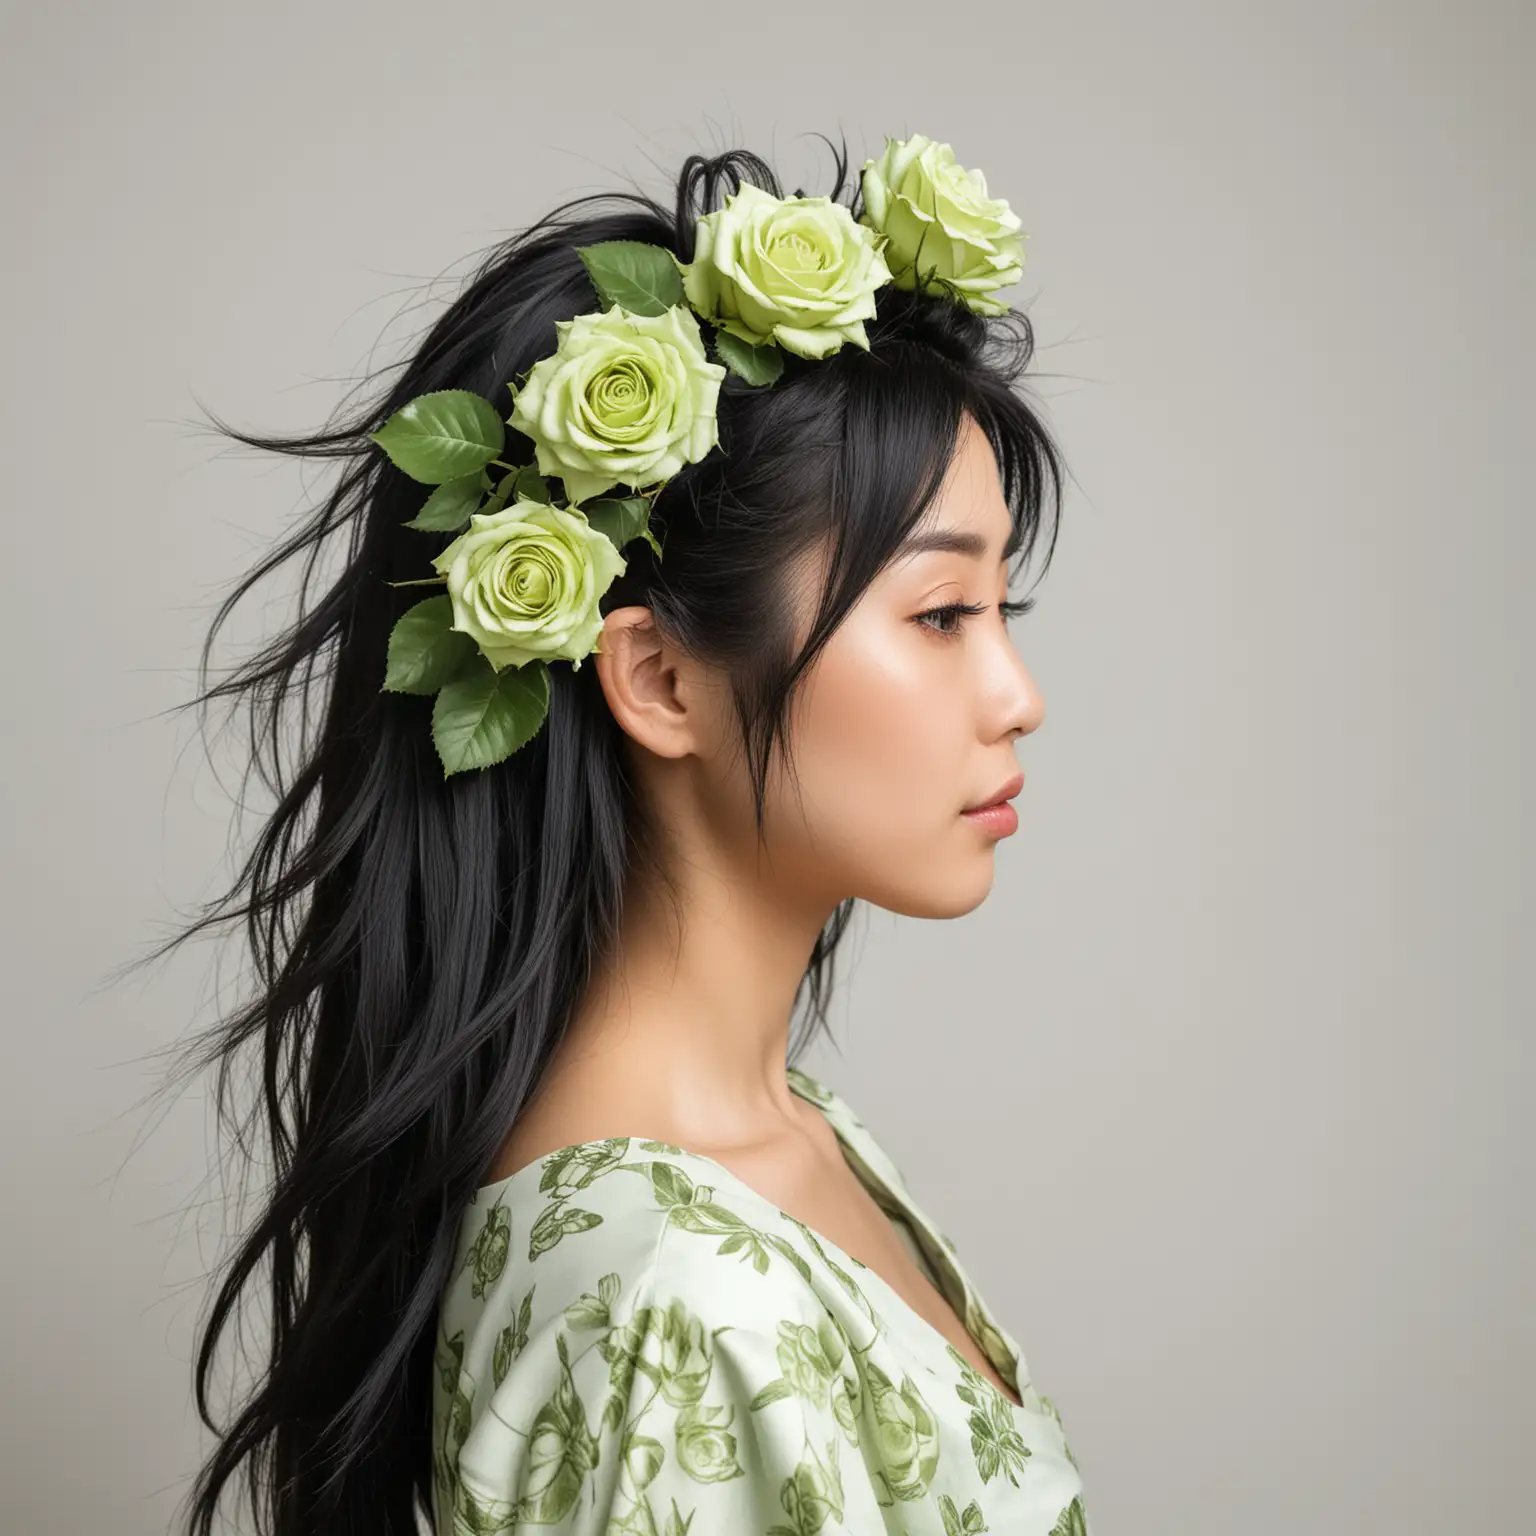 Portrait photograph, side profile view, beautiful Japanese woman with long black super saiyan hair, lime-green roses in her hair, white background